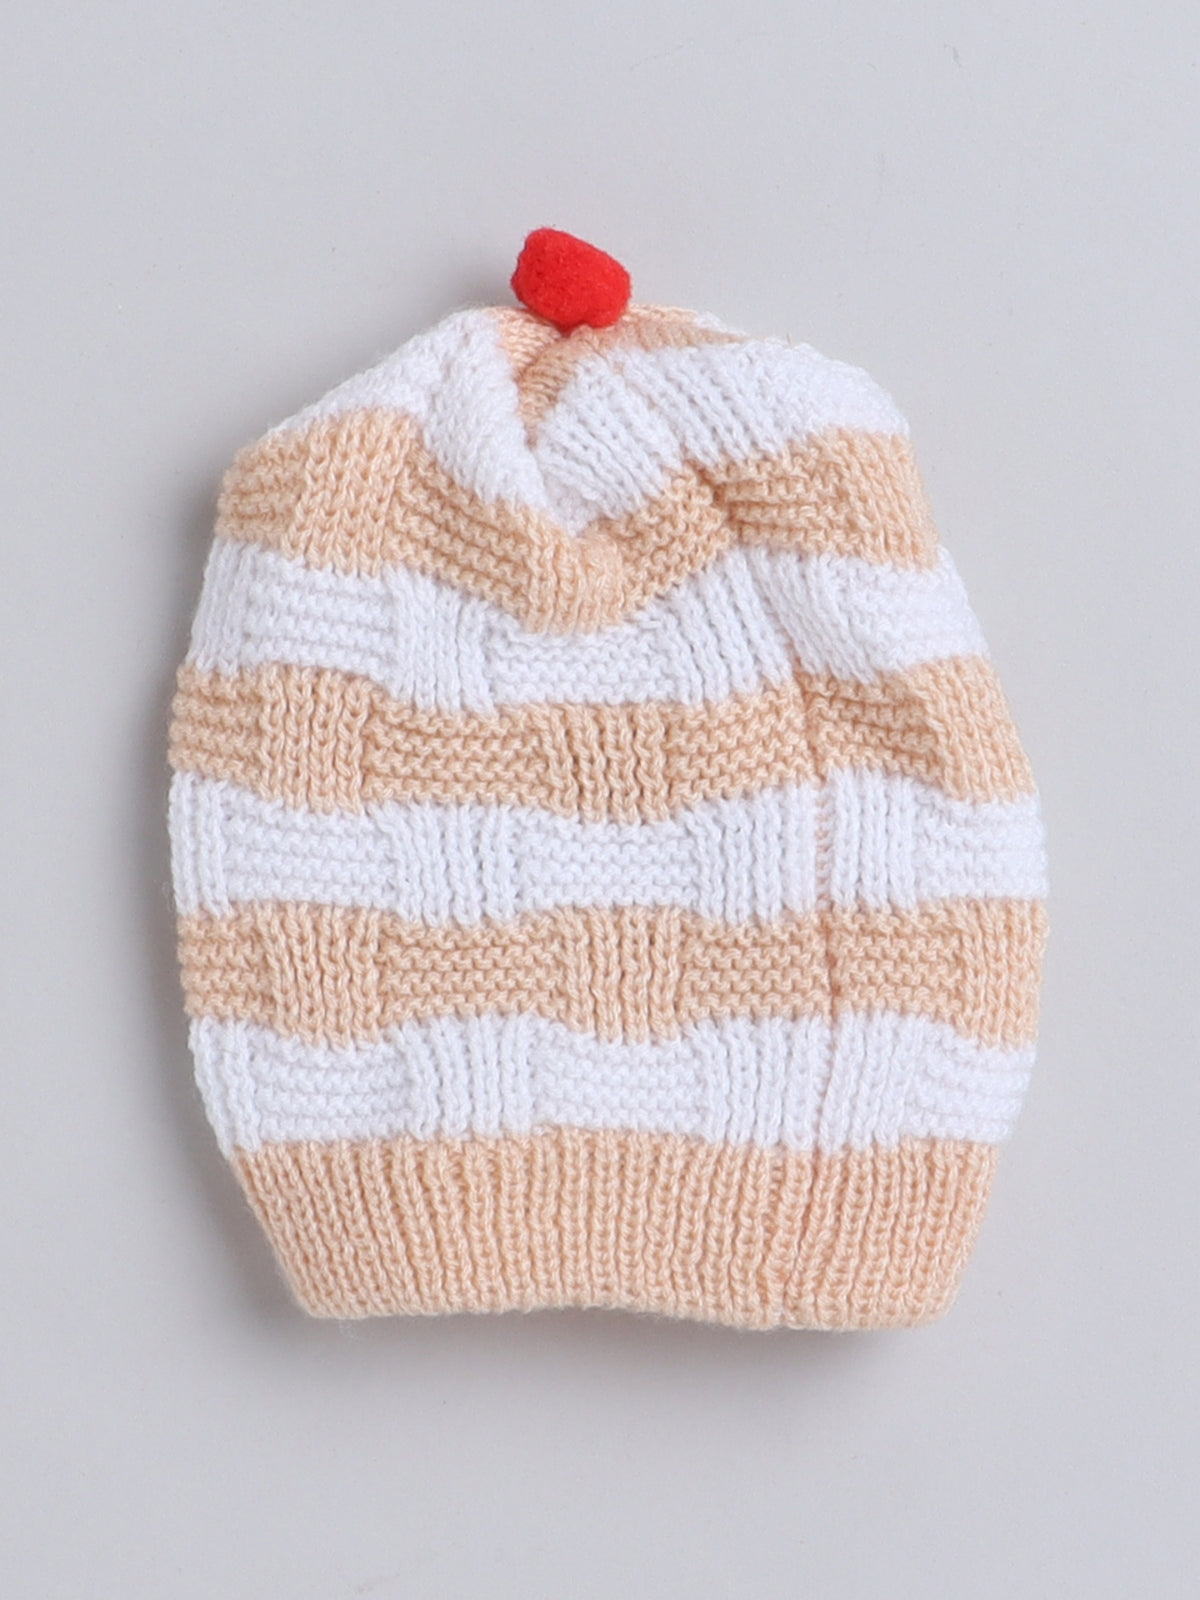 Knit Stripe Pattern round cap for baby